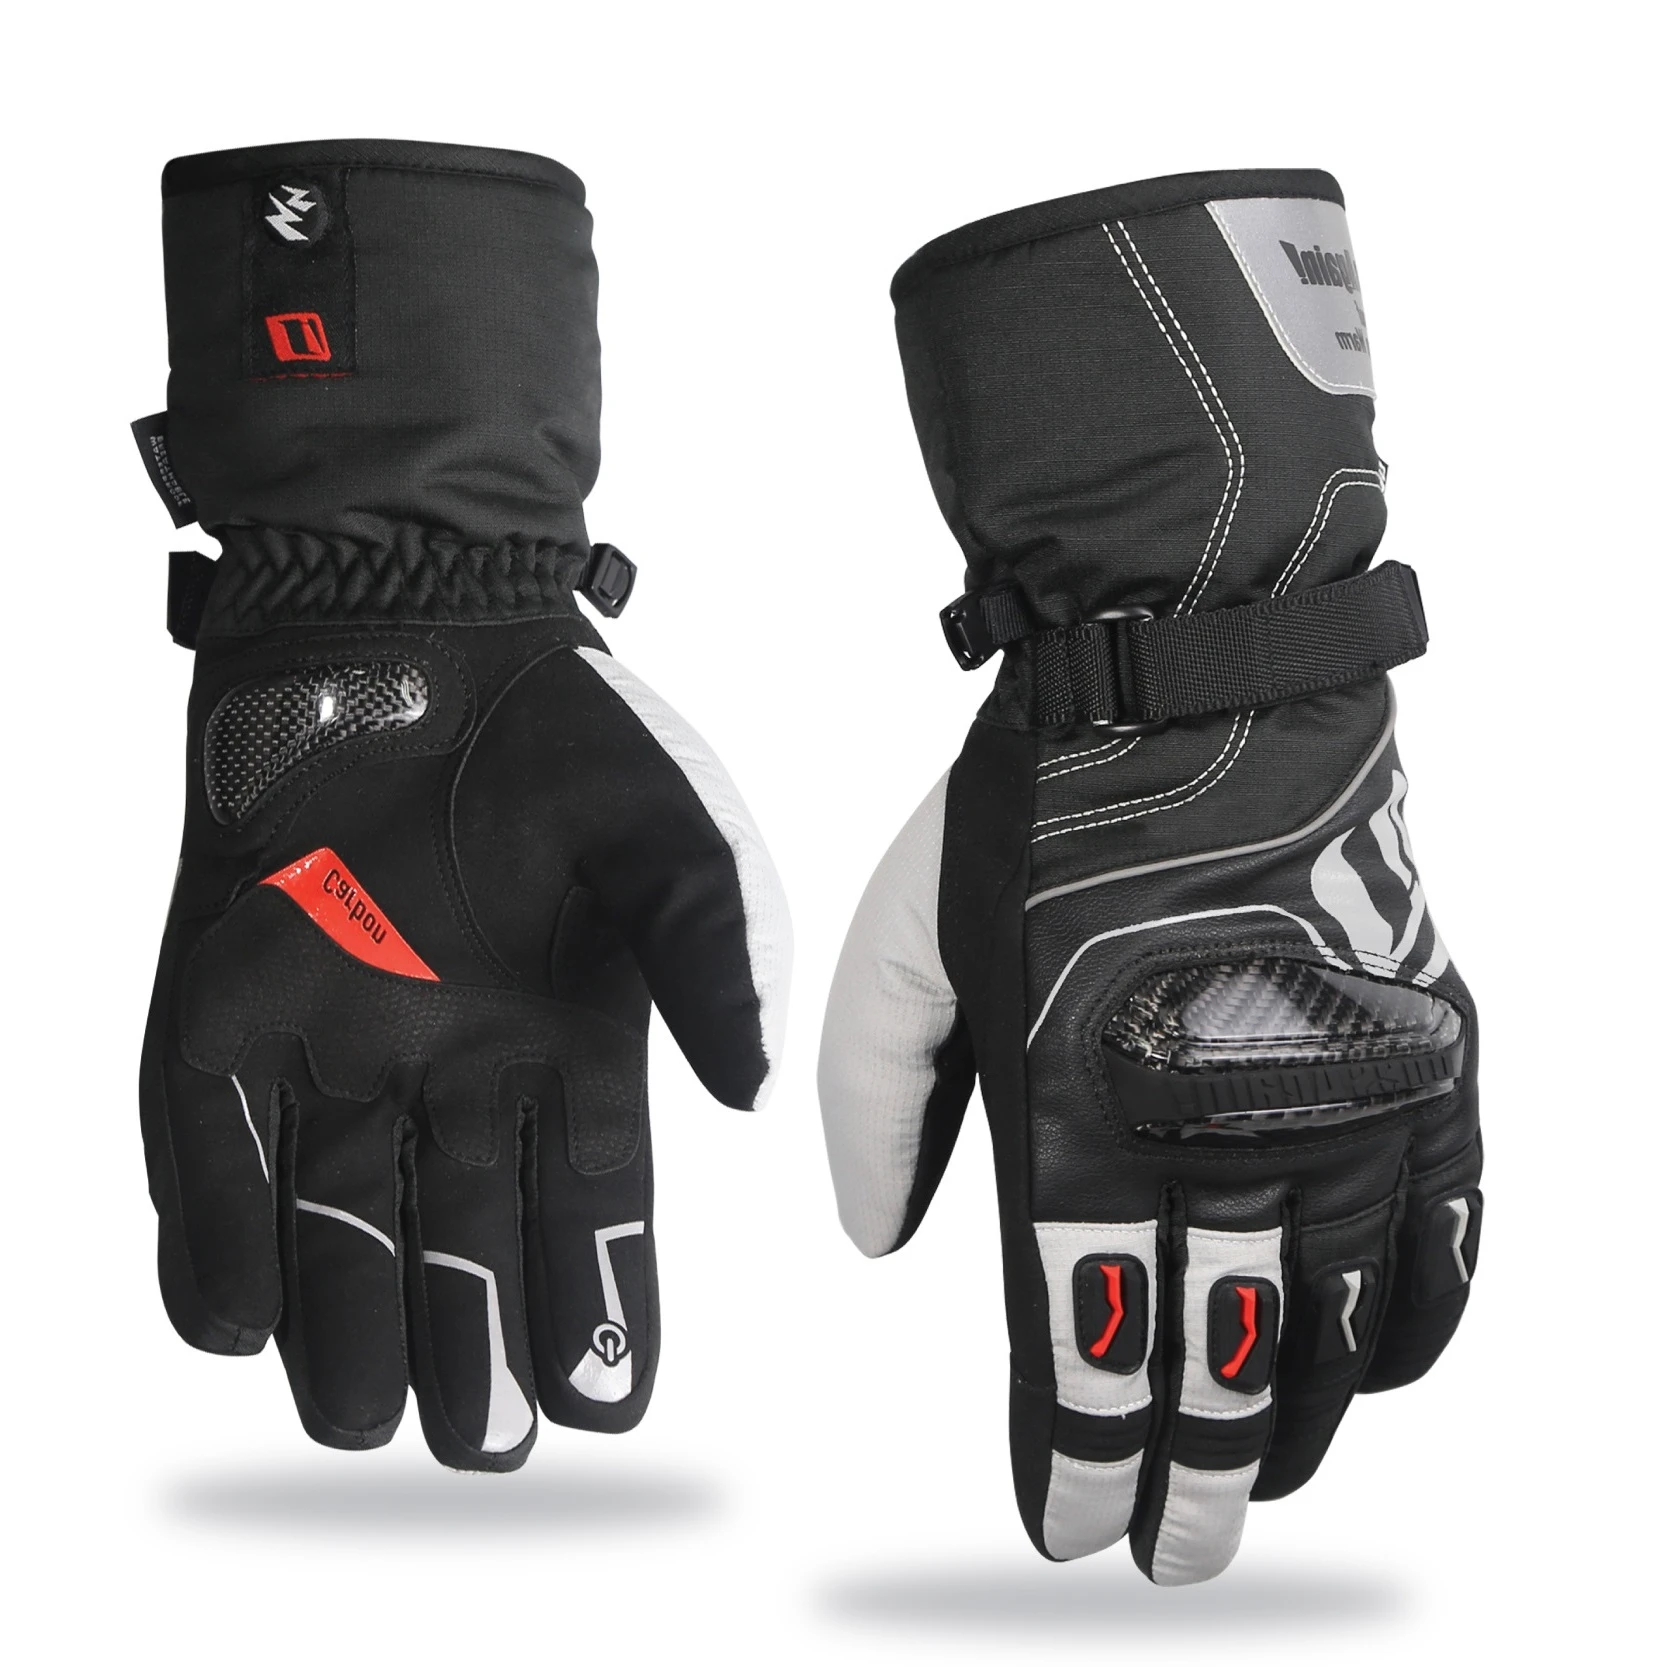 Sport Waterproof Anti Slip Touchscreen Full Finger Car Riding Cycling Motorcycle Racing Gloves